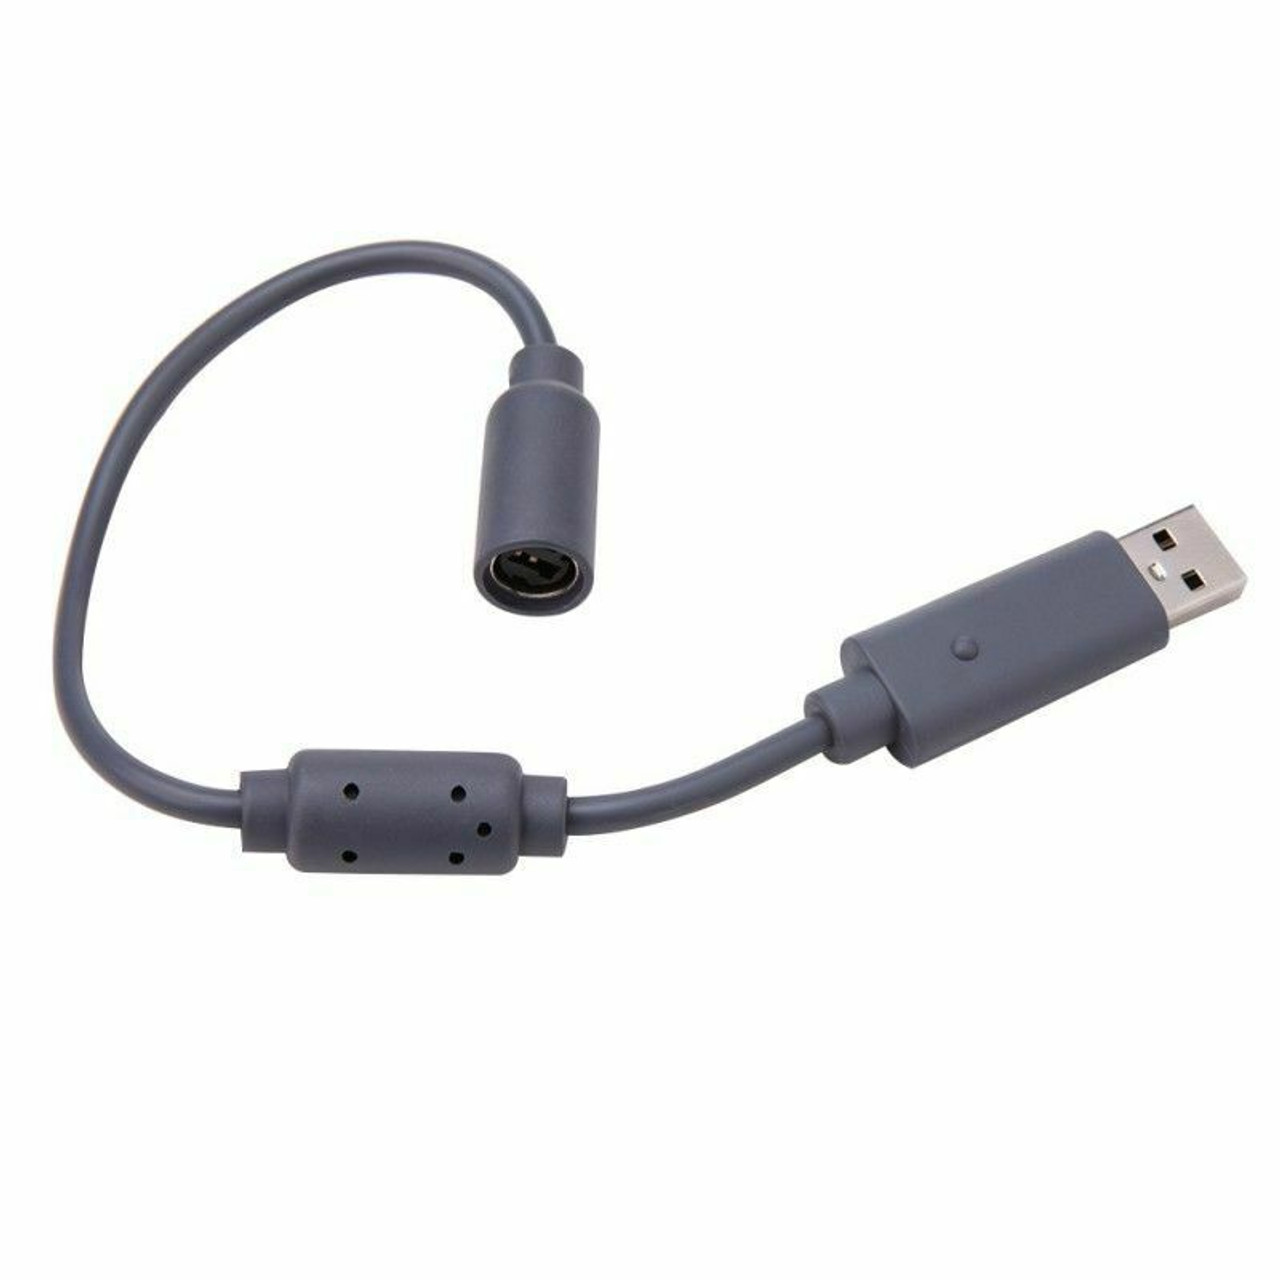 USB Breakaway Dongle Cable Cord Adapter For Xbox 360 PC Wired Controller USA